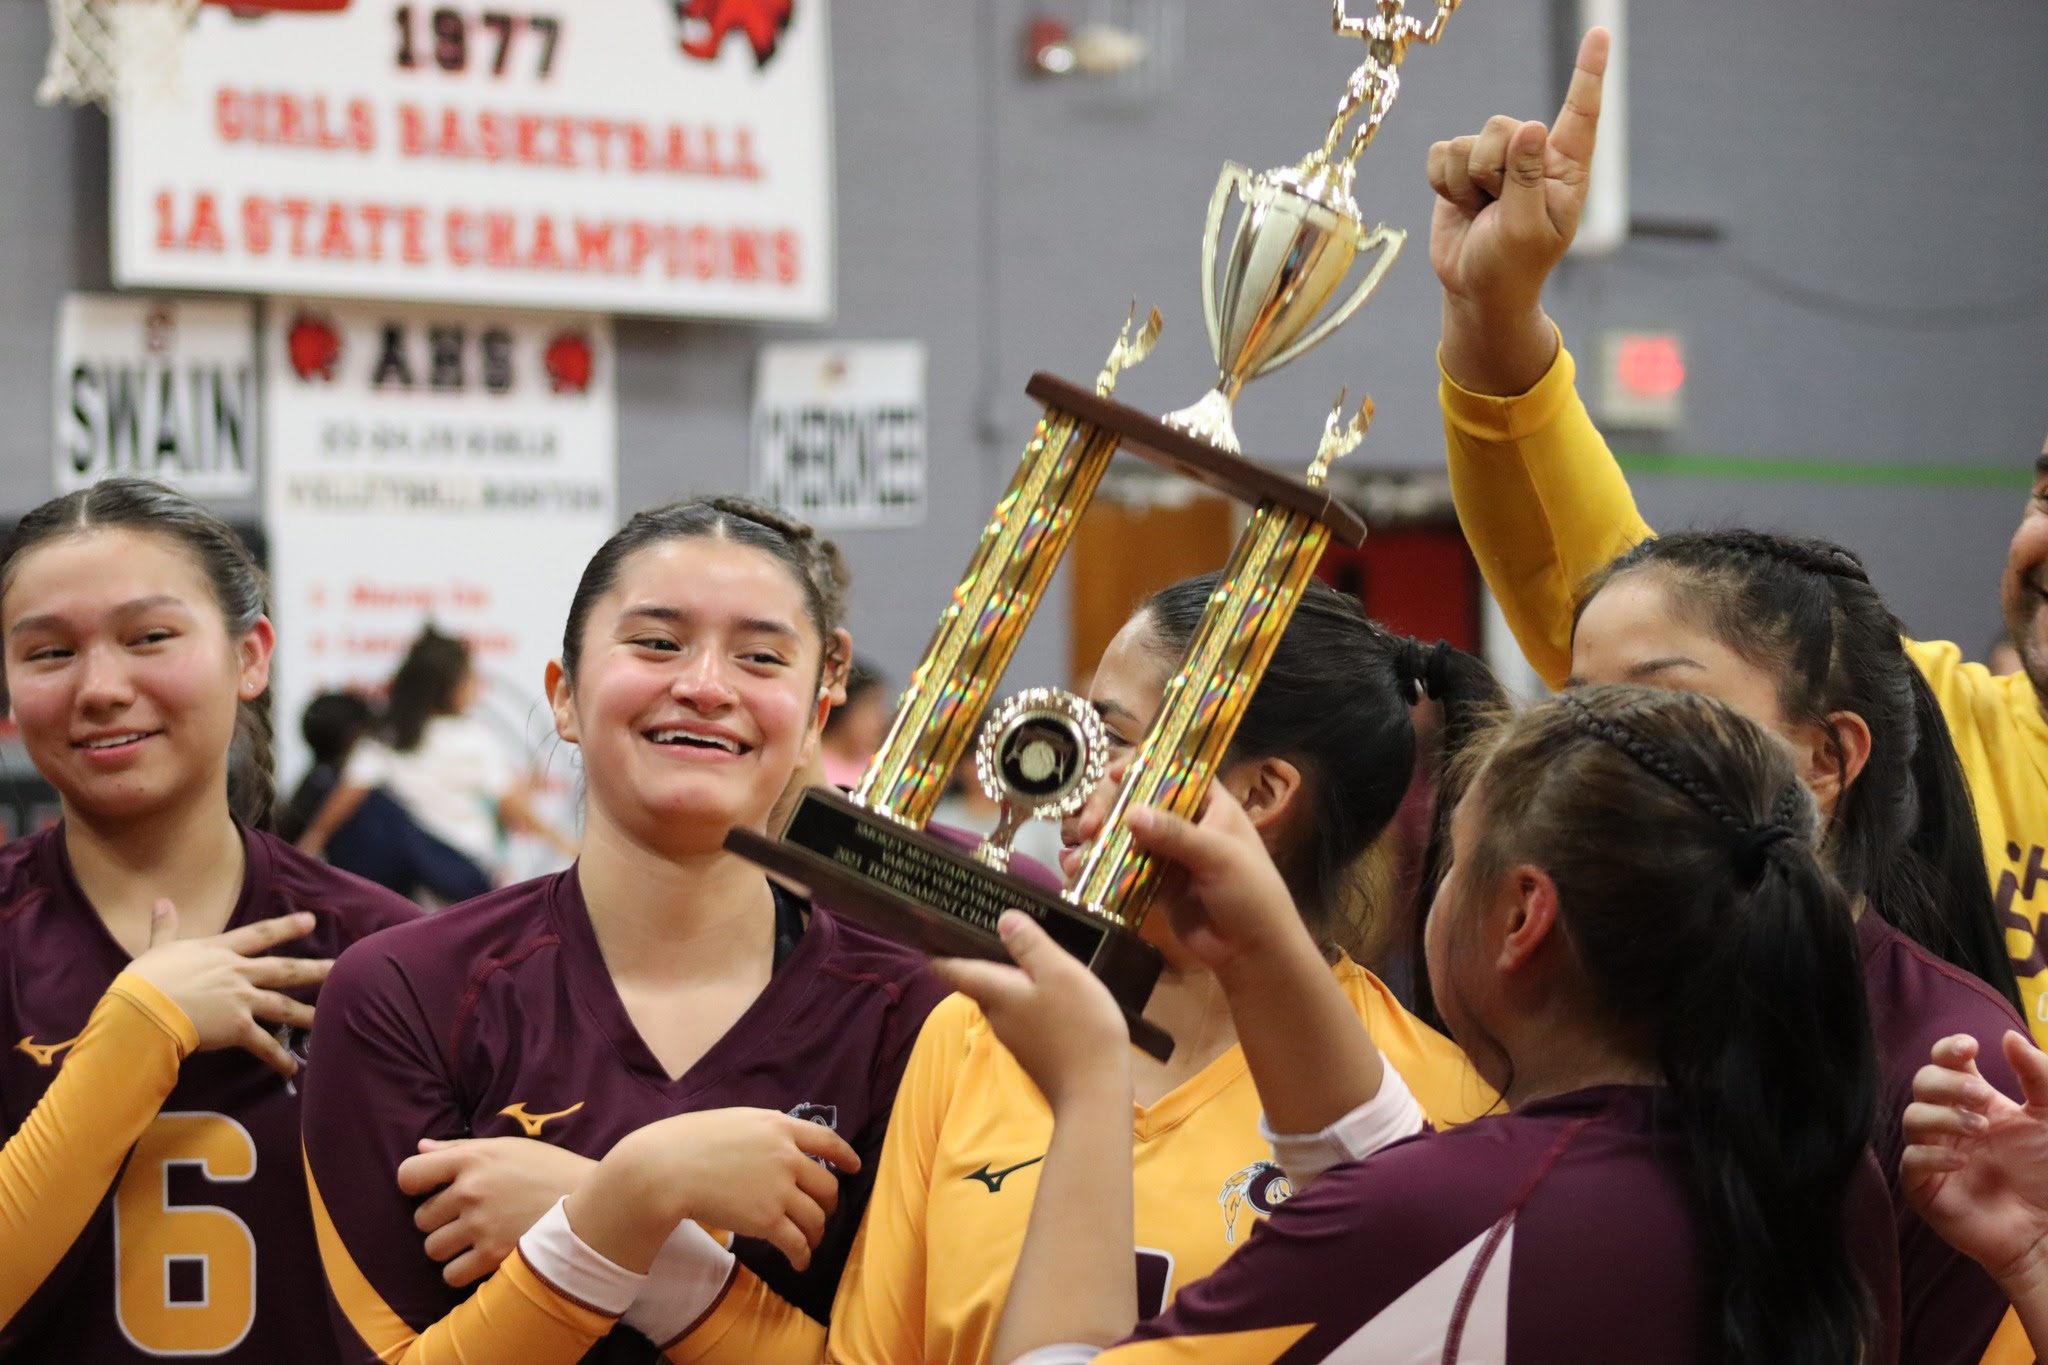 A group of the Lady Braves wearing maroon and gold uniforms hold up their trophy after winning the 2023-24 SMC Tournament Championship